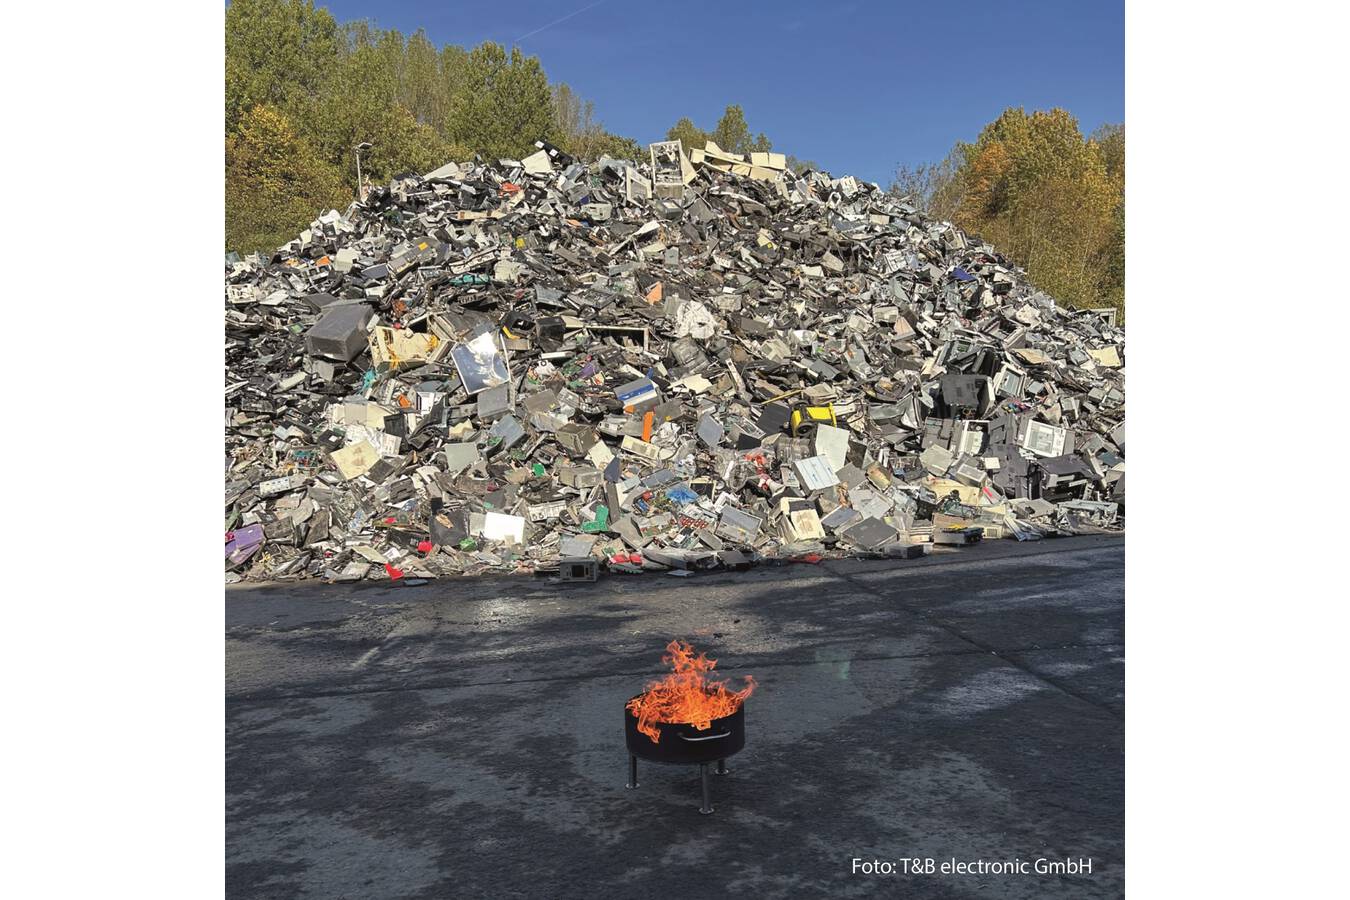 Simulation of a fire developing in a recycling centre. Thanks to dual certification, the camera can be used to realise safe fire protection solutions that comply with regulations.